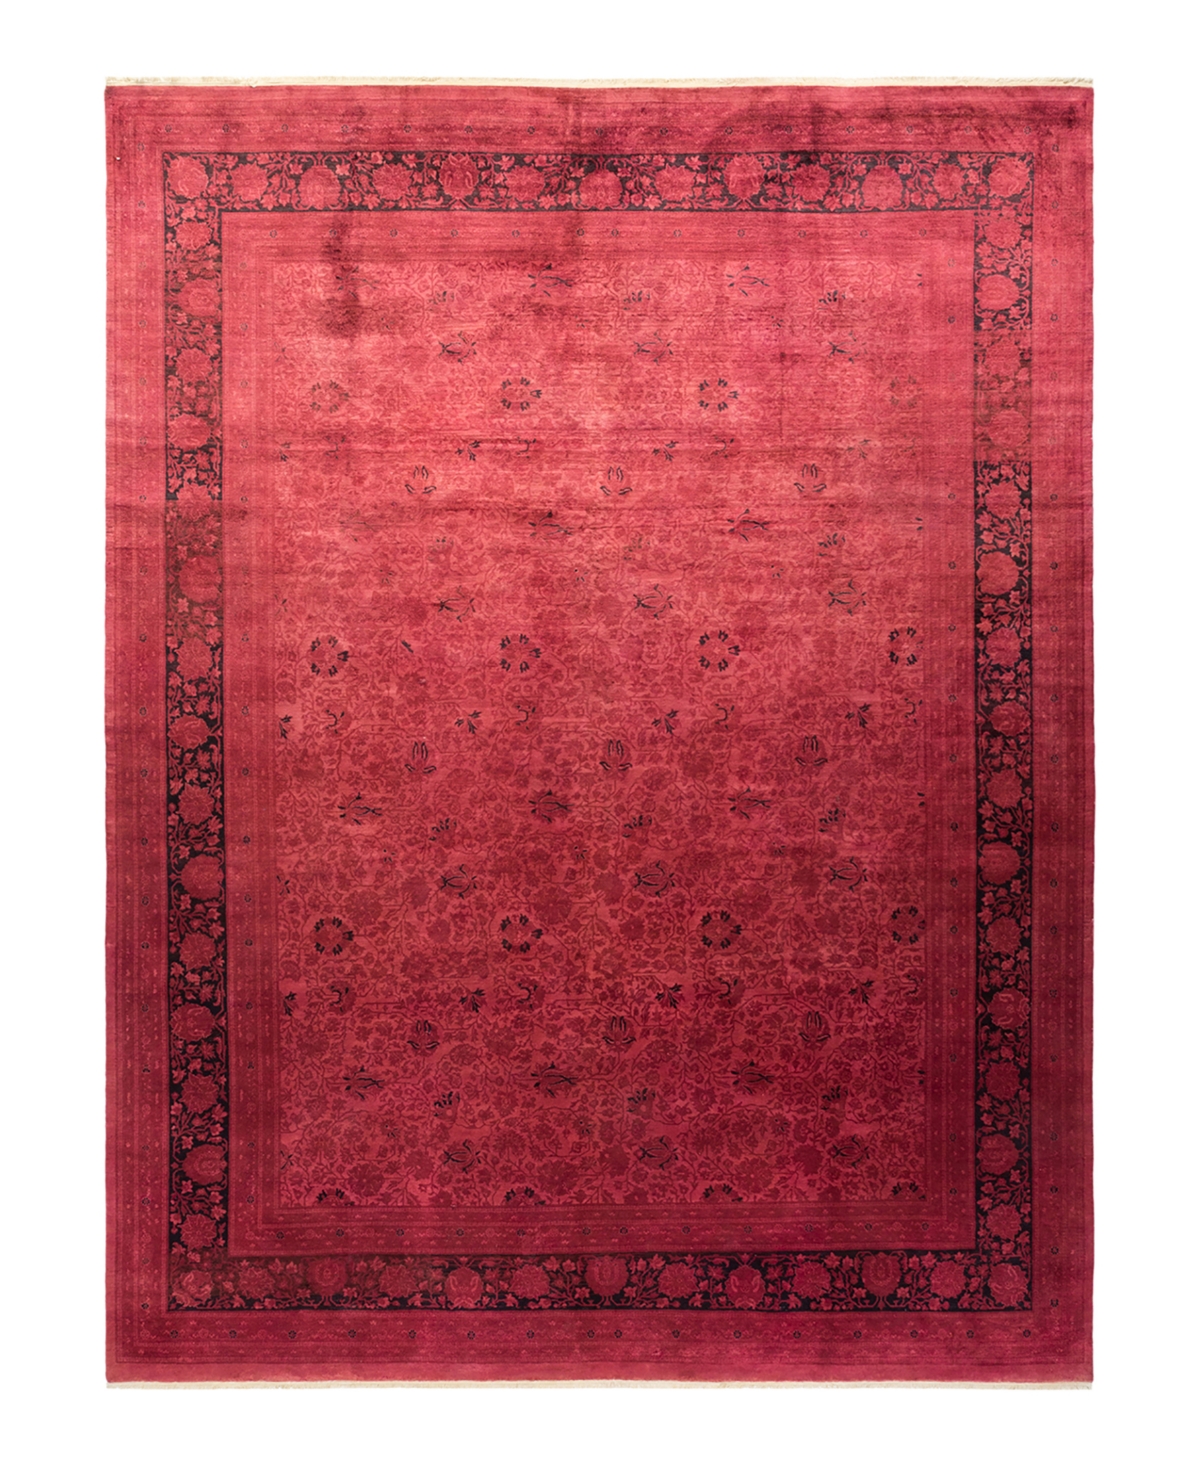 Adorn Hand Woven Rugs Transitional M1647 9'3in x 11'10in Area Rug - Red